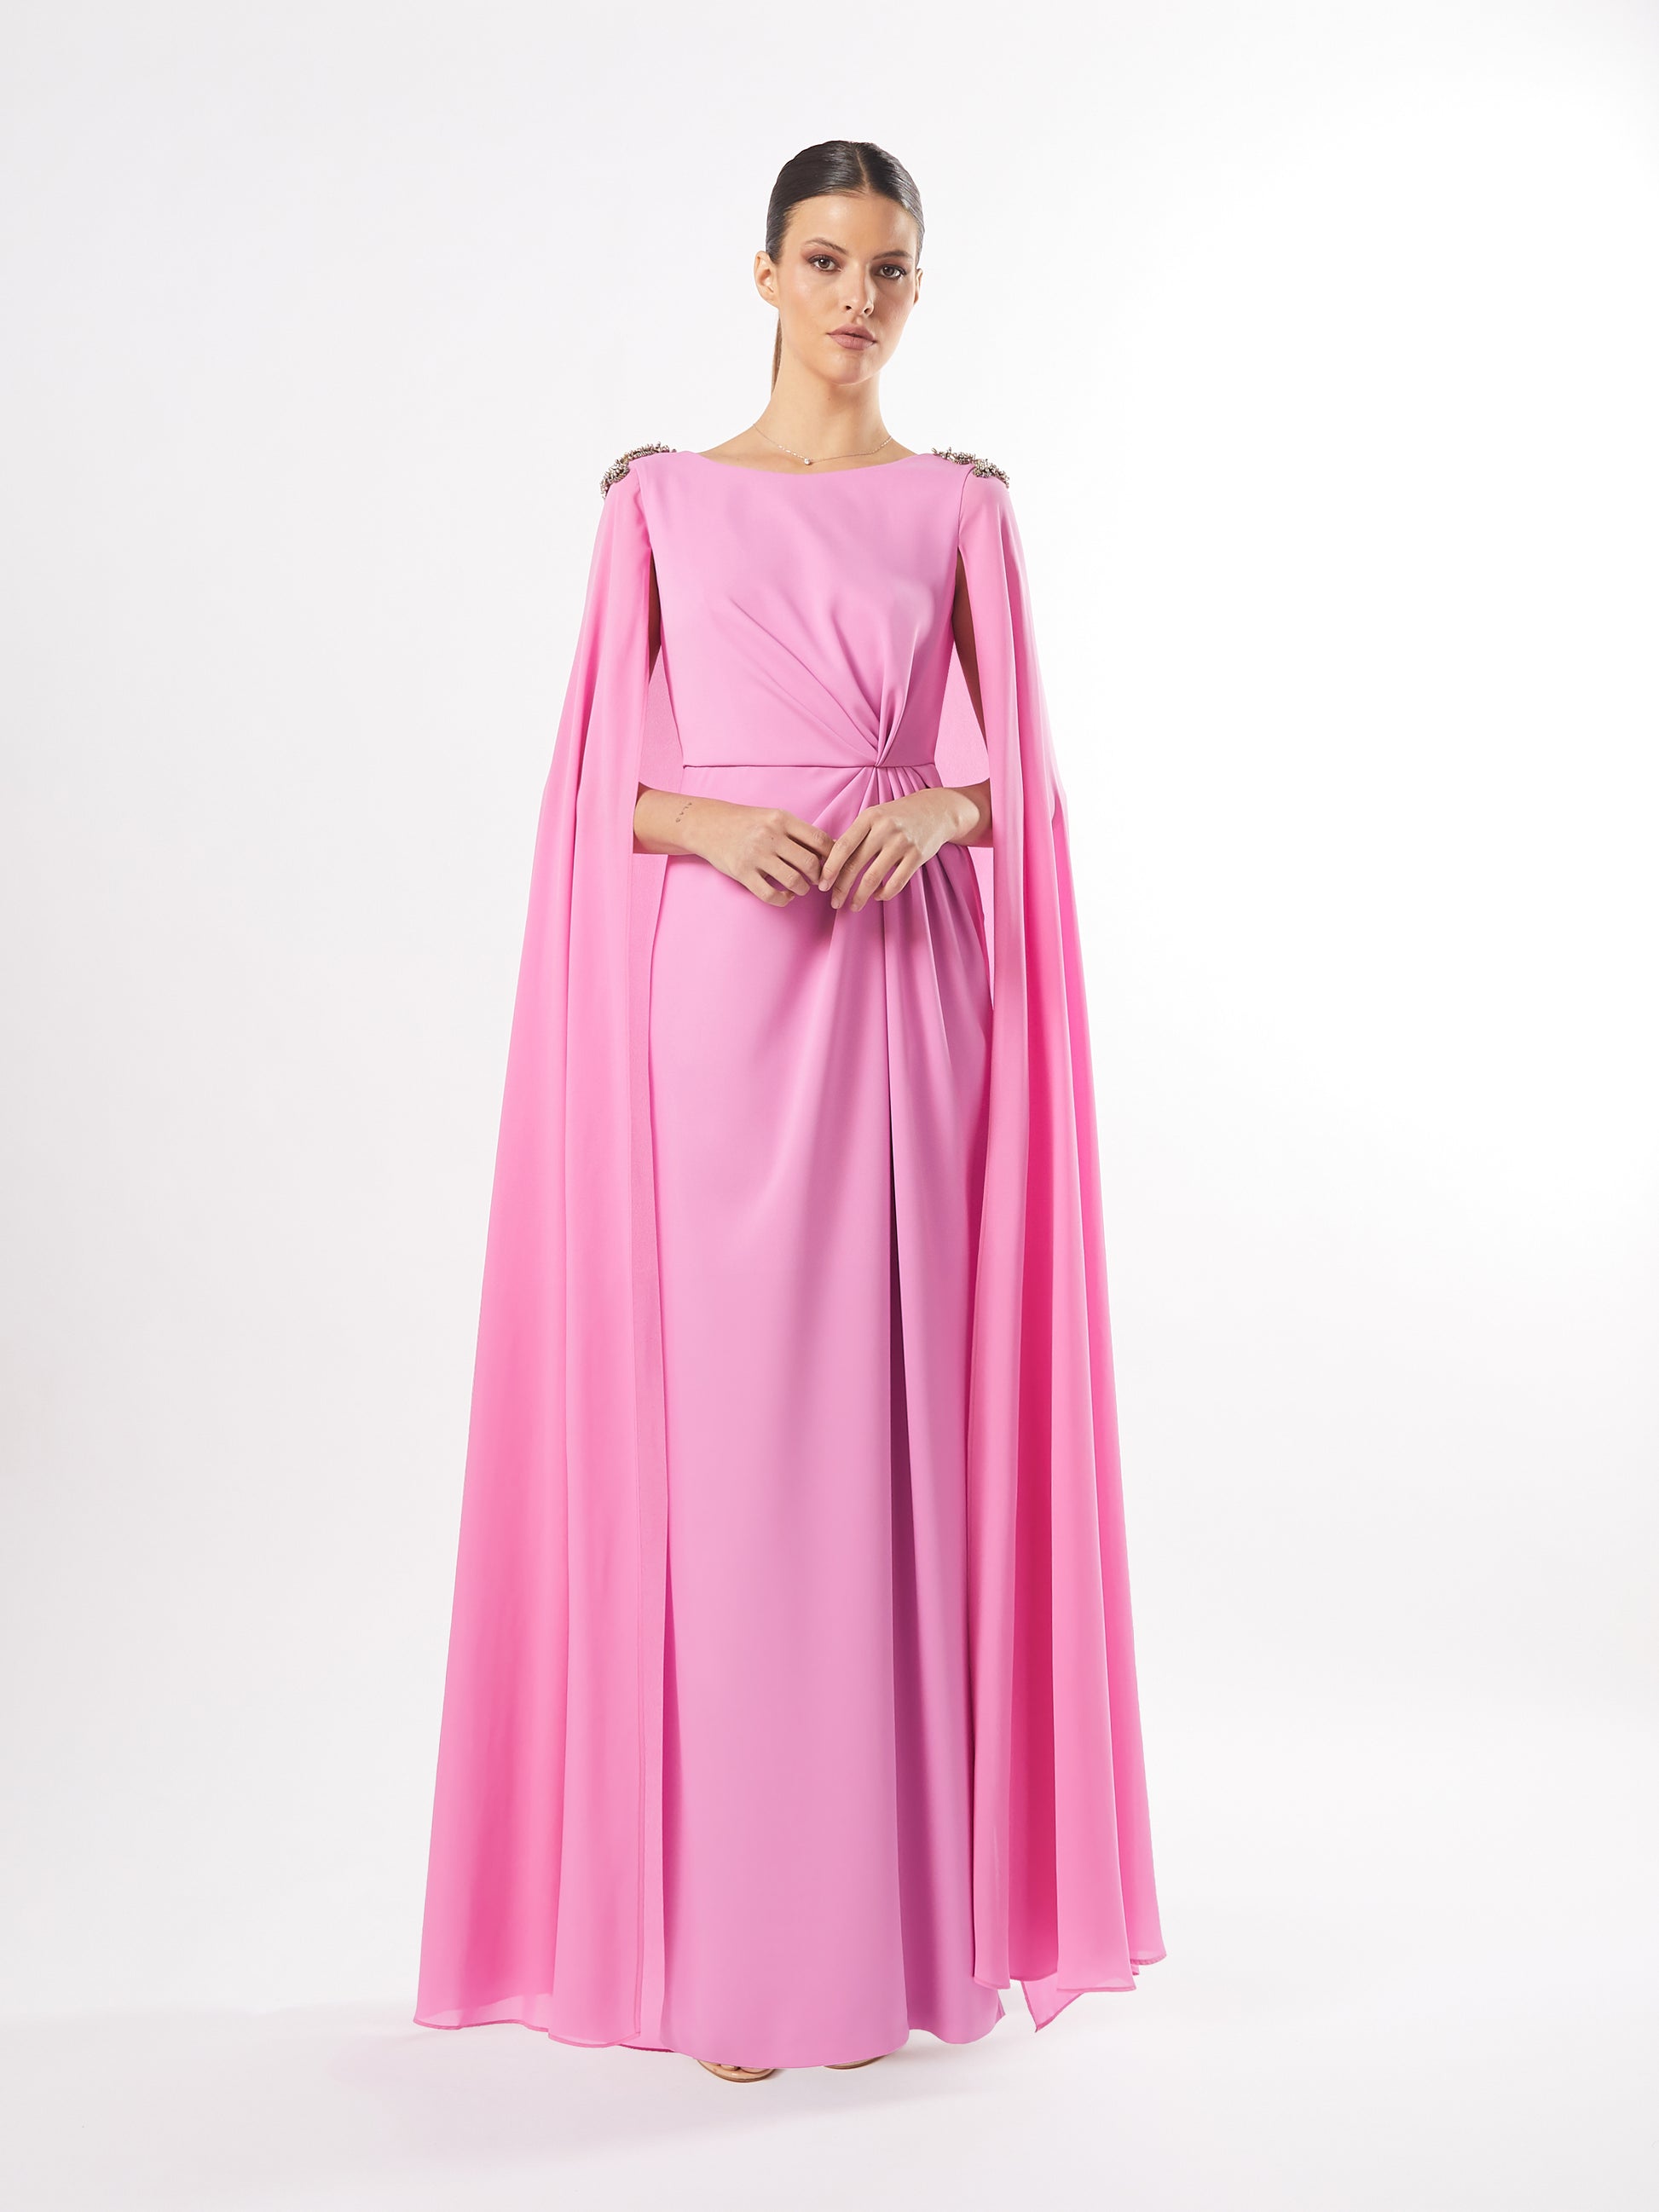 Model in a pink cape-sleeve evening gown with crystal shoulder embellishments, available in both pink and teal, against a white background.